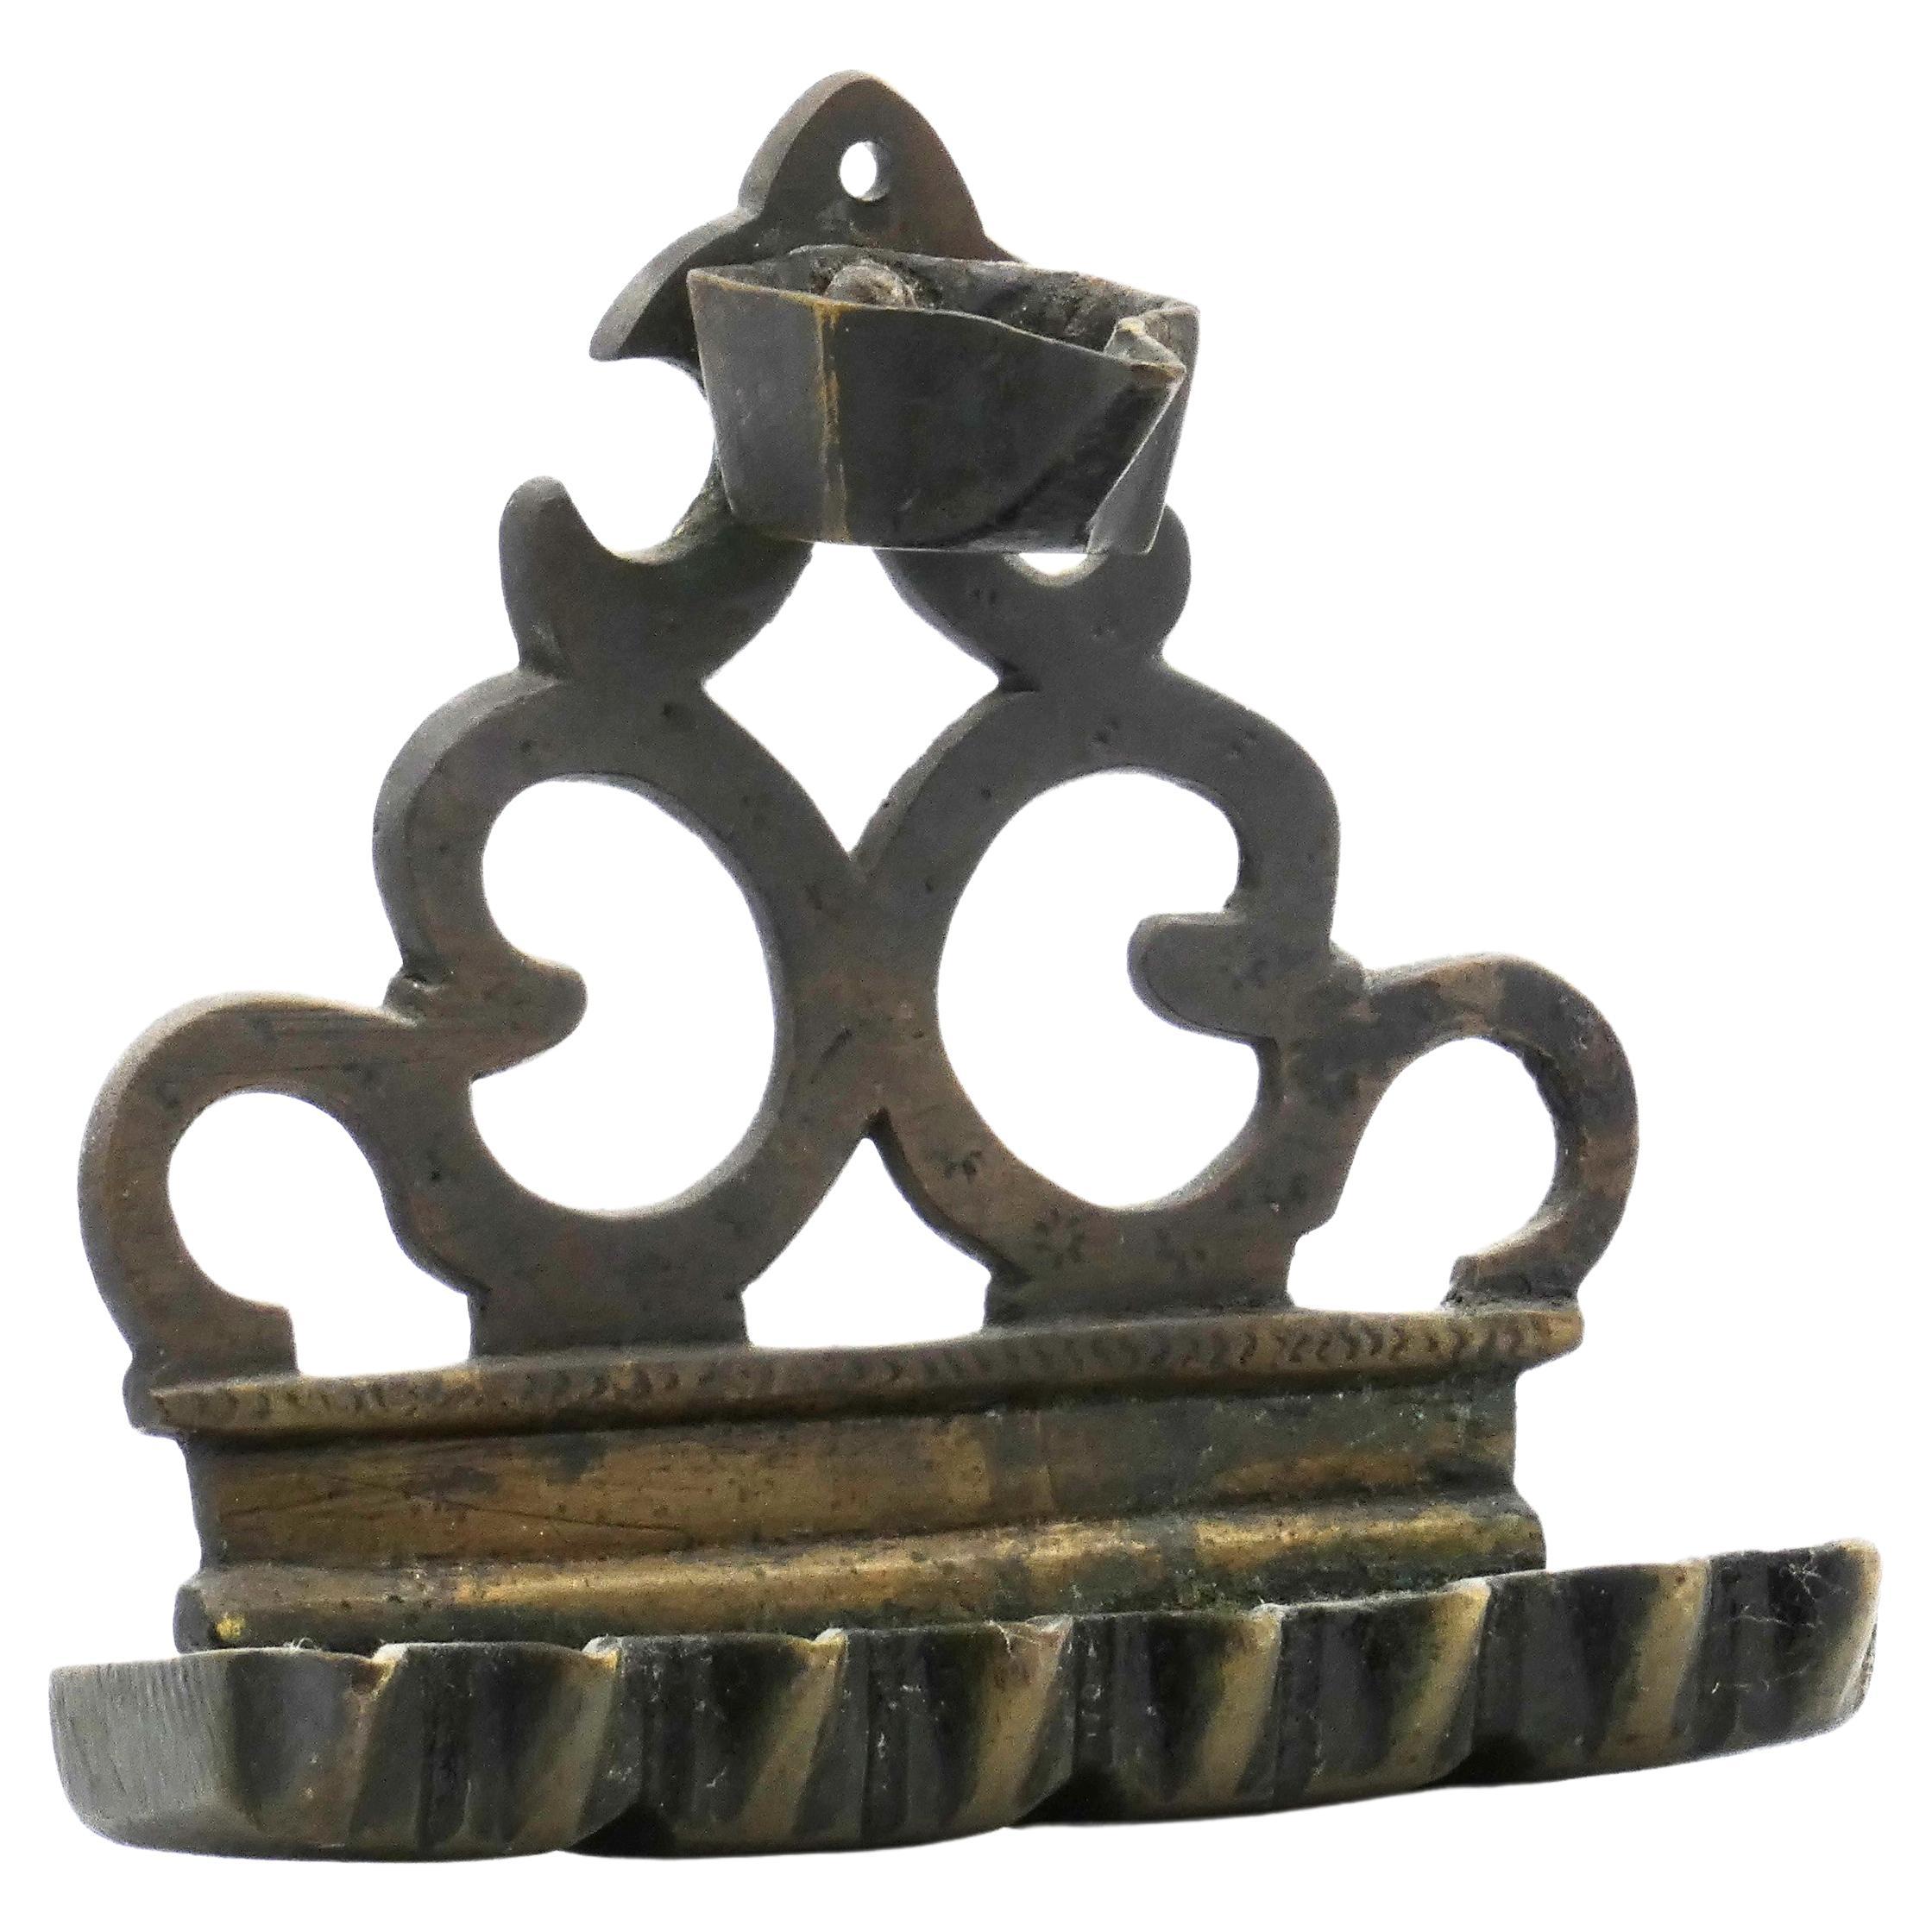 North African cast brass Hanukkah Lamp Menorah, mid 19th century

There are two sources for the triangular, small-scaled Hanukkah lamp, one in Spain, the other in Sicily. This lamp represents the prototype from Sicily, which migrated as far as